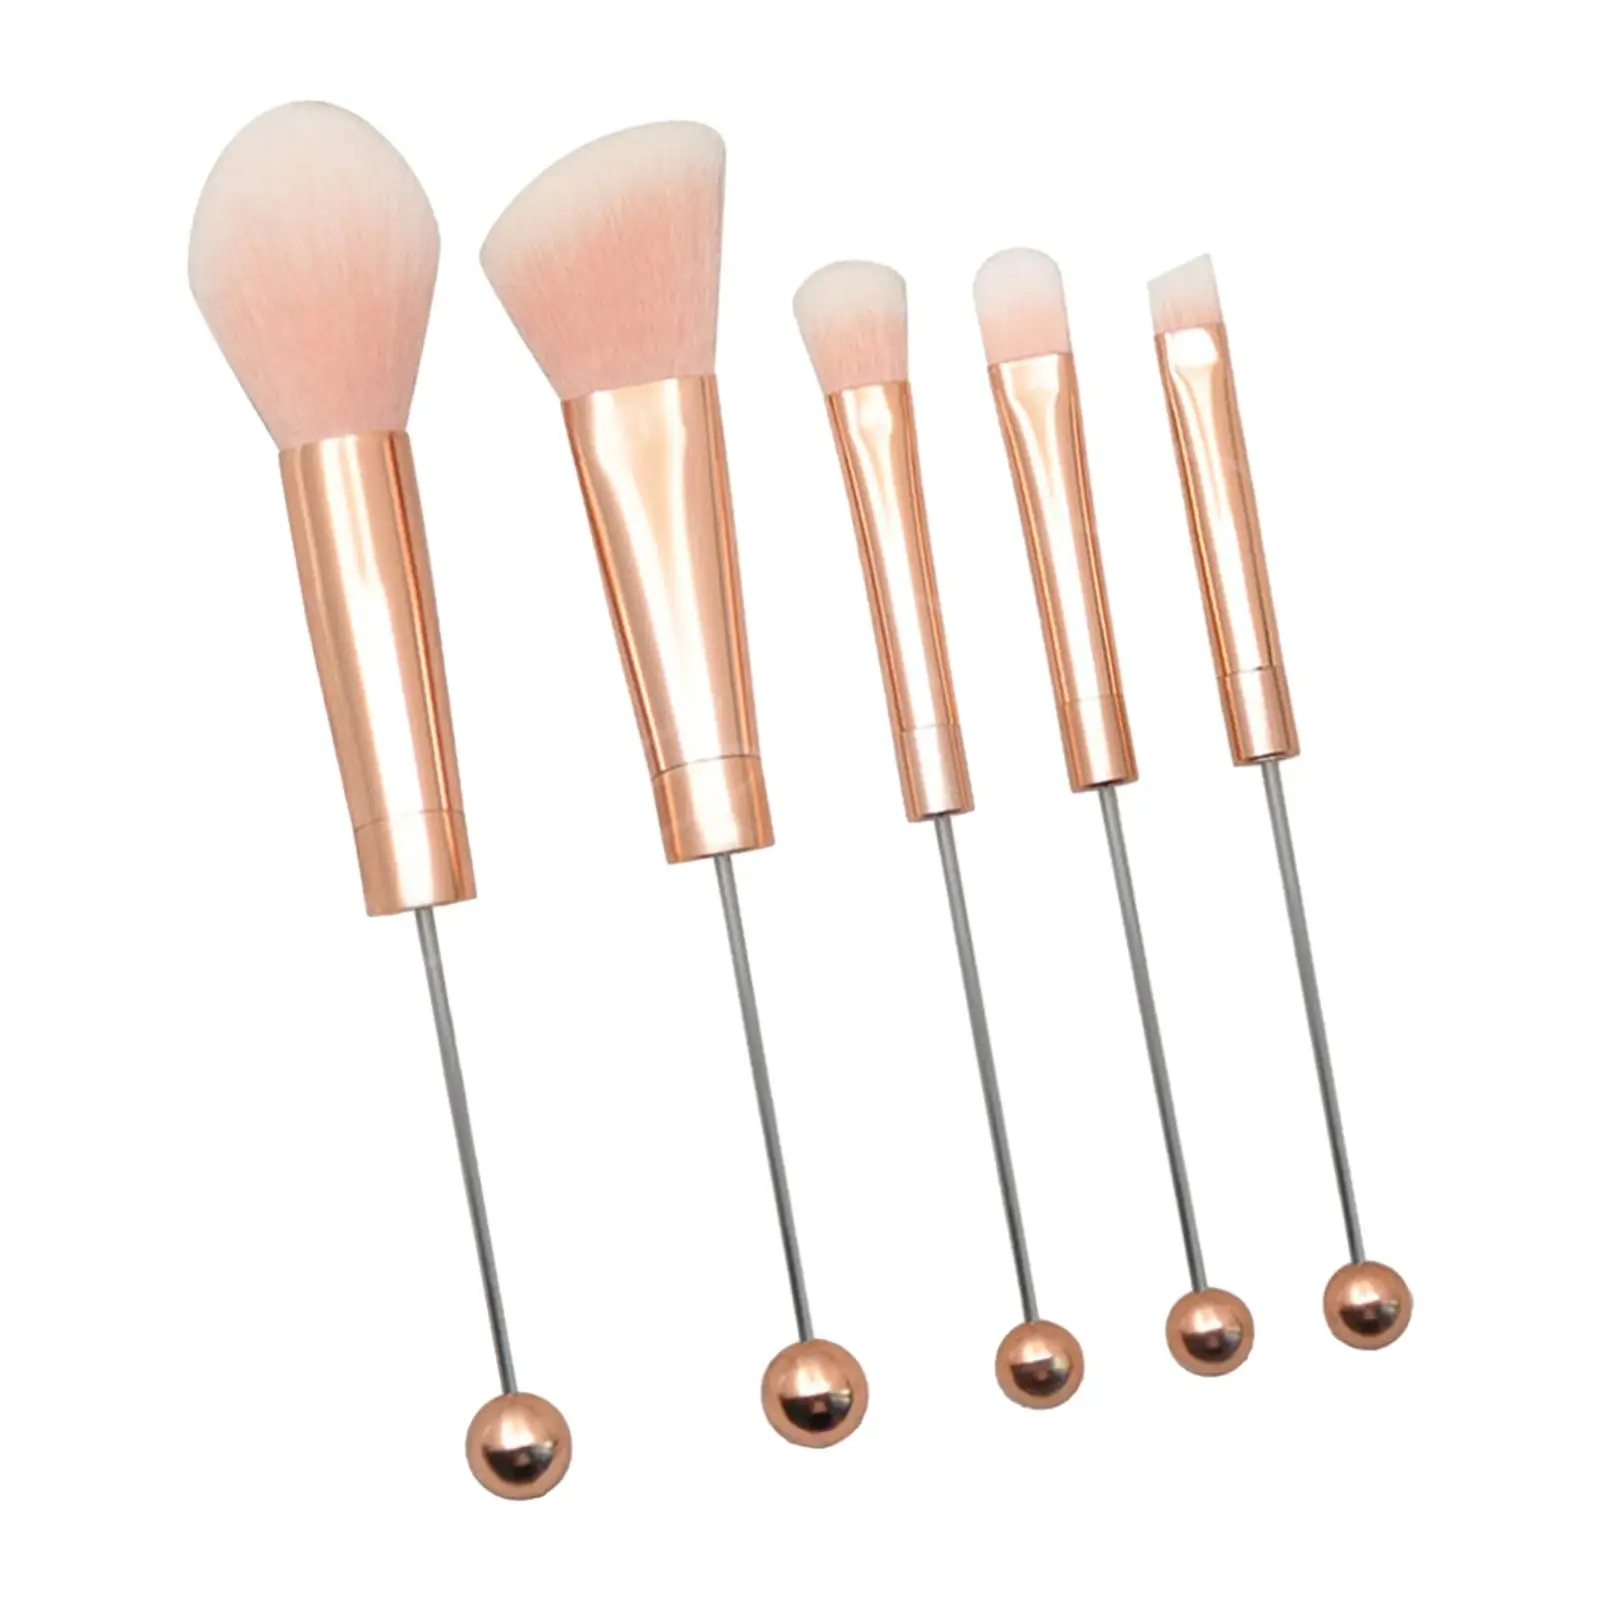 5x Eye Makeup Brush Set Blending and Lips Foundation Eyebrow Face Makeup Brush Kits for Lady Bestie Women Adults Holiday Gifts